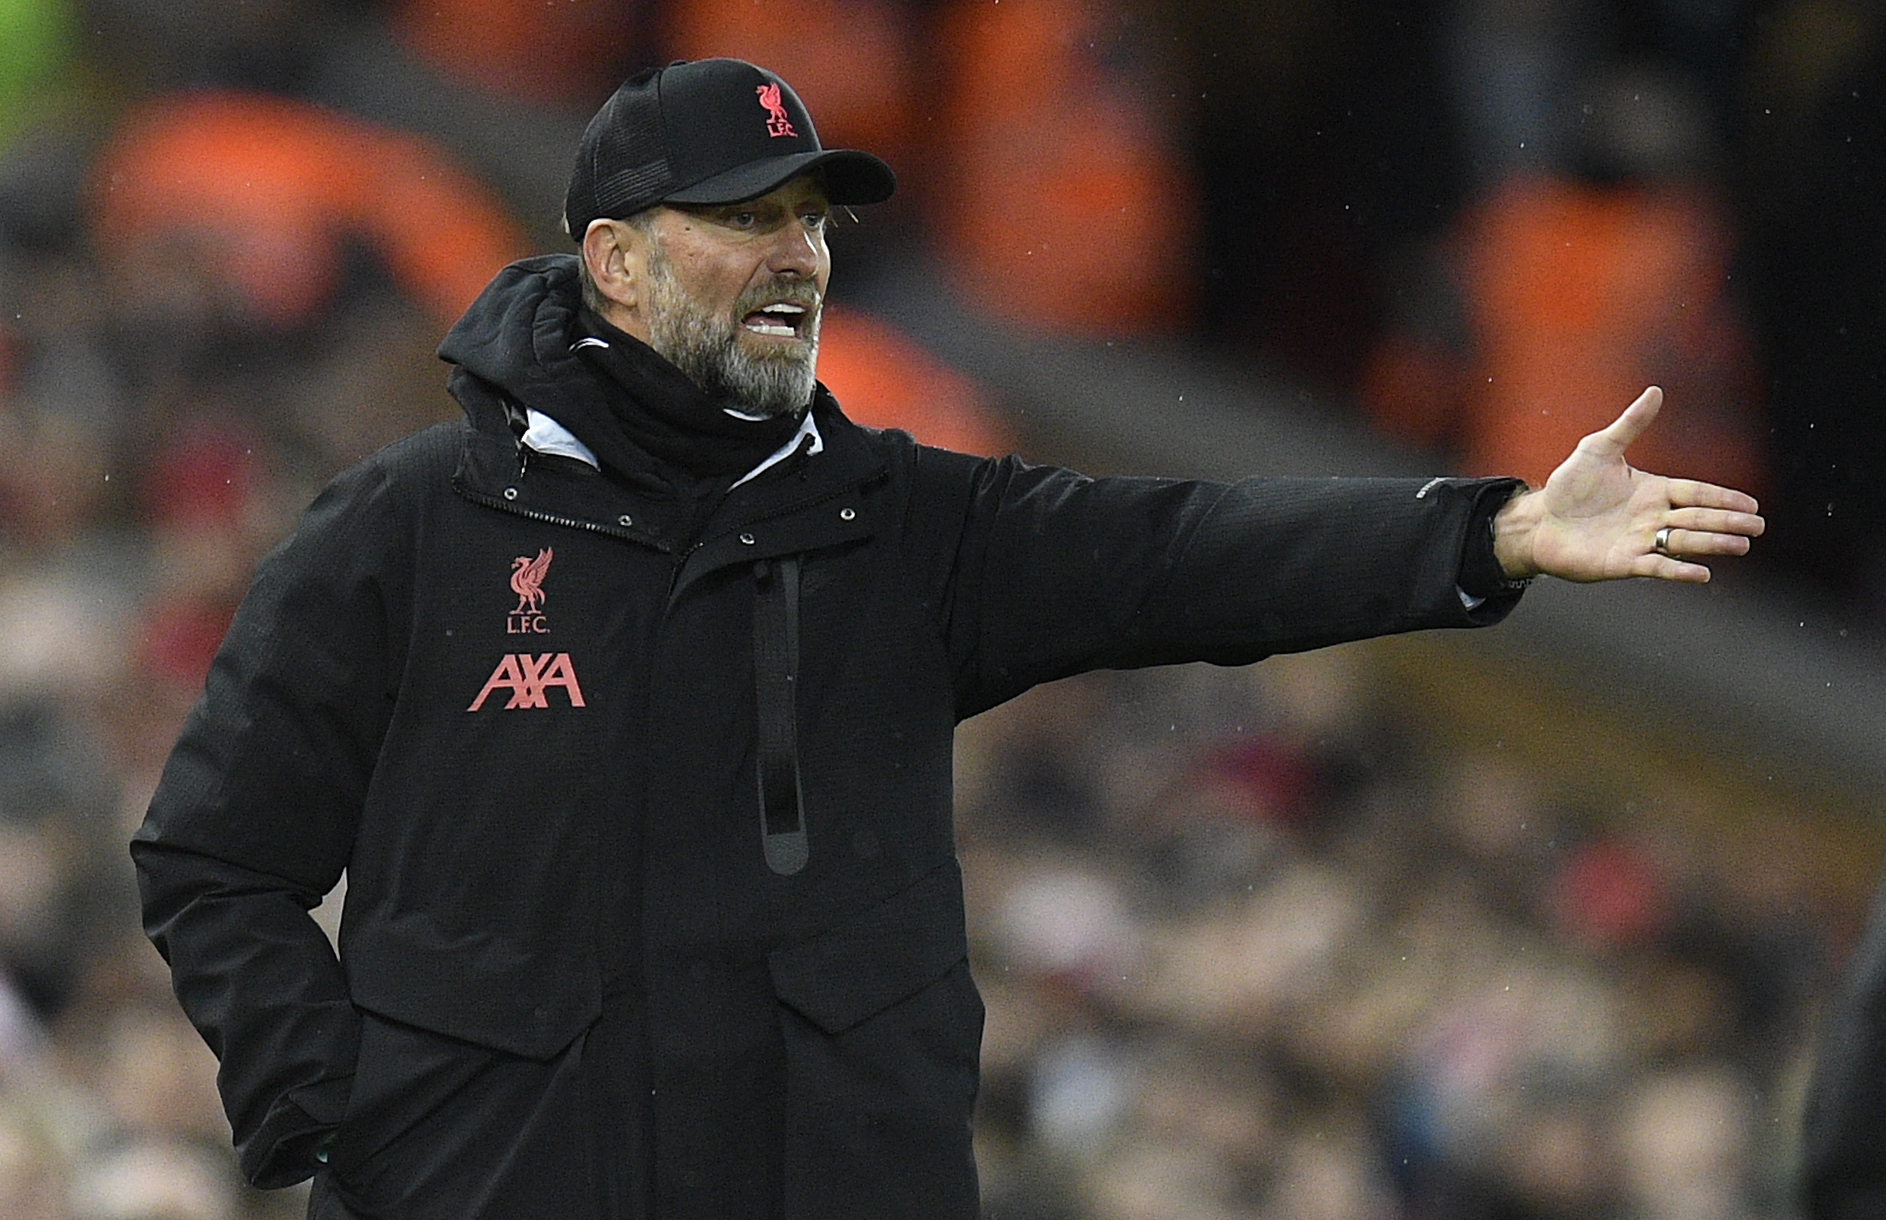 “I have no clue…” – Shocking stat has Jurgen Klopp baffled as worrying Liverpool trend emerges